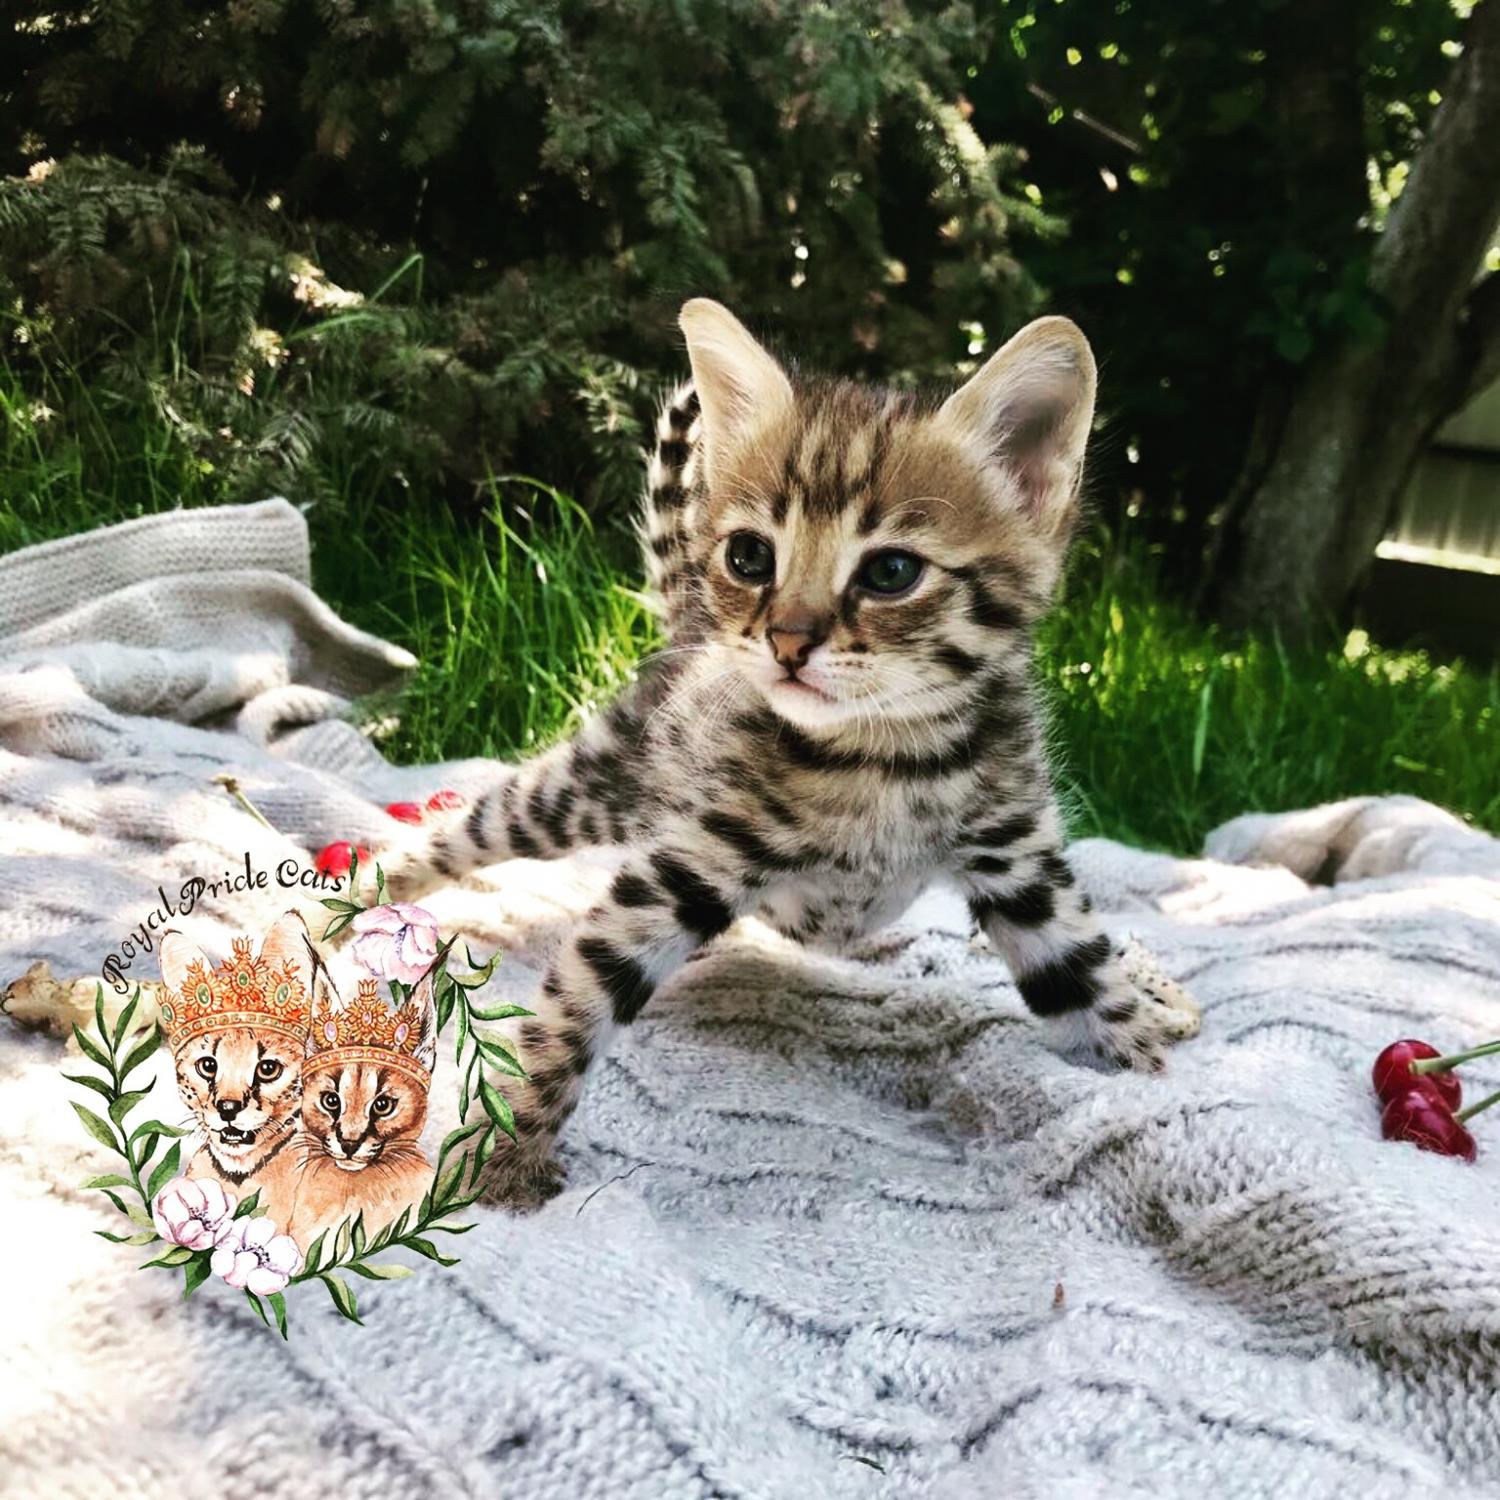 Amazing Savannah F1 kittens for sale, Cats, for Sale, Price